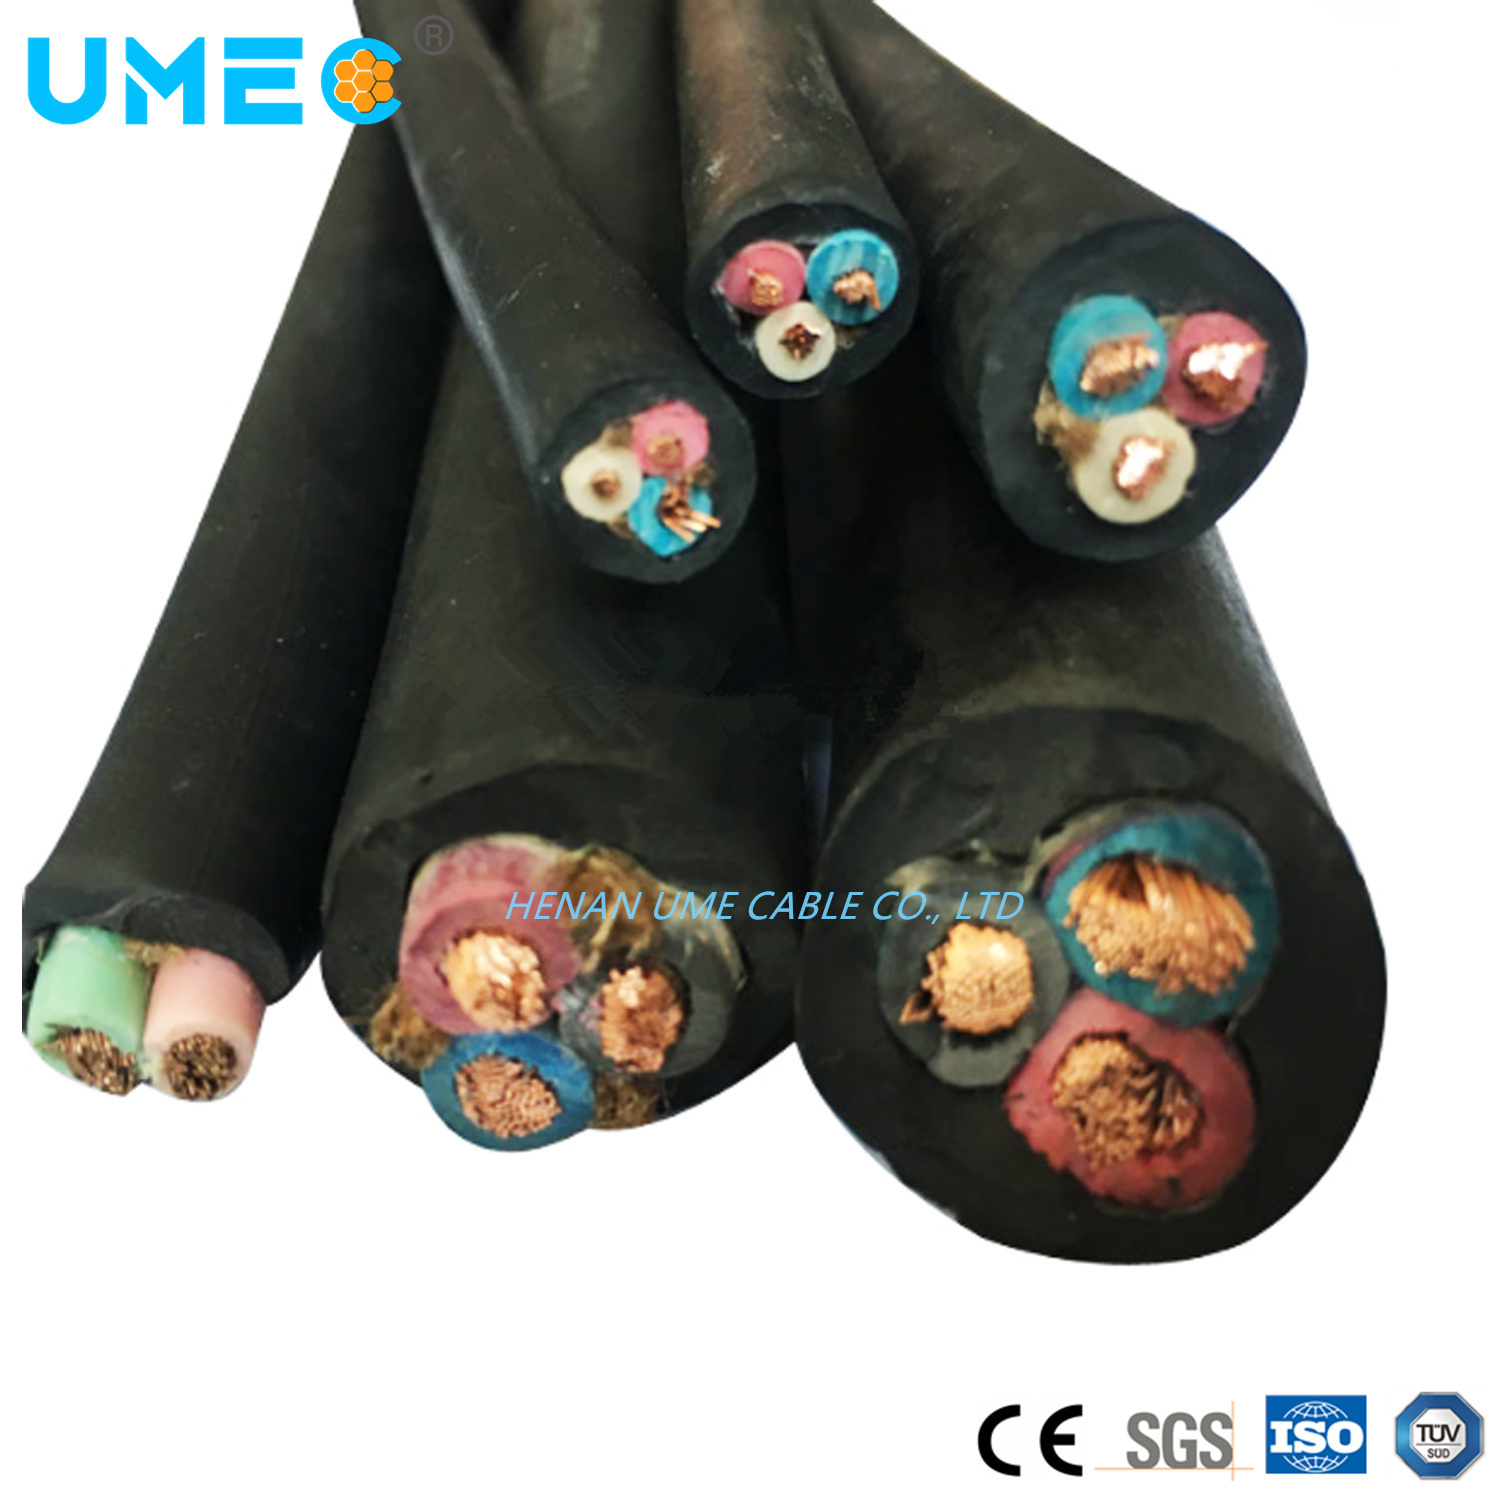 Rubber Insulated and Sheathed Rubber Flexible Cable Yc/Yz/Ycw